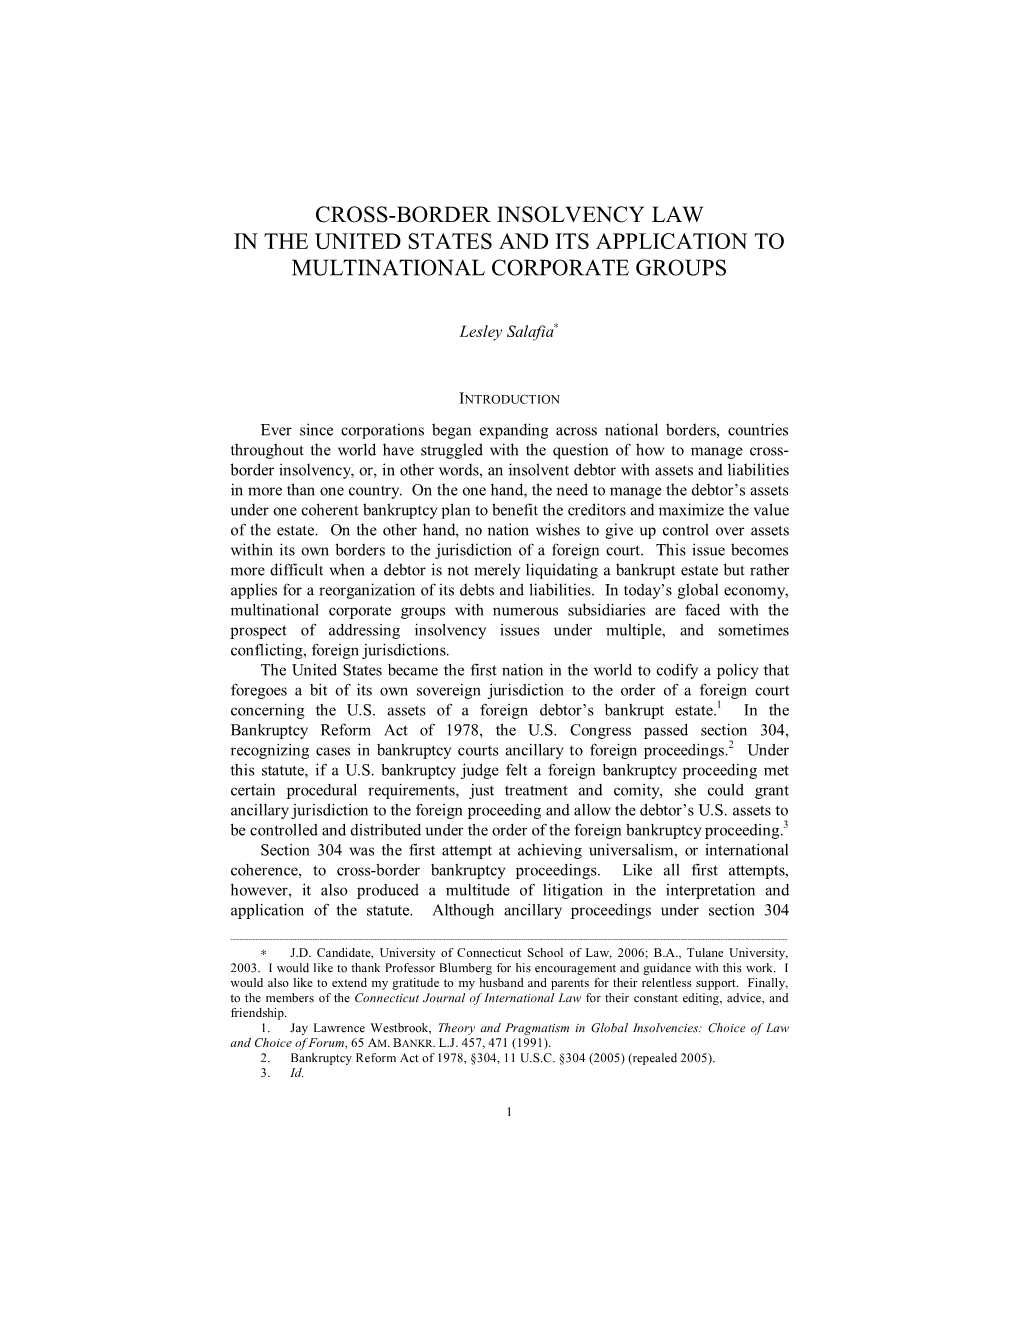 Cross-Border Insolvency Law in the United States and Its Application to Multinational Corporate Groups